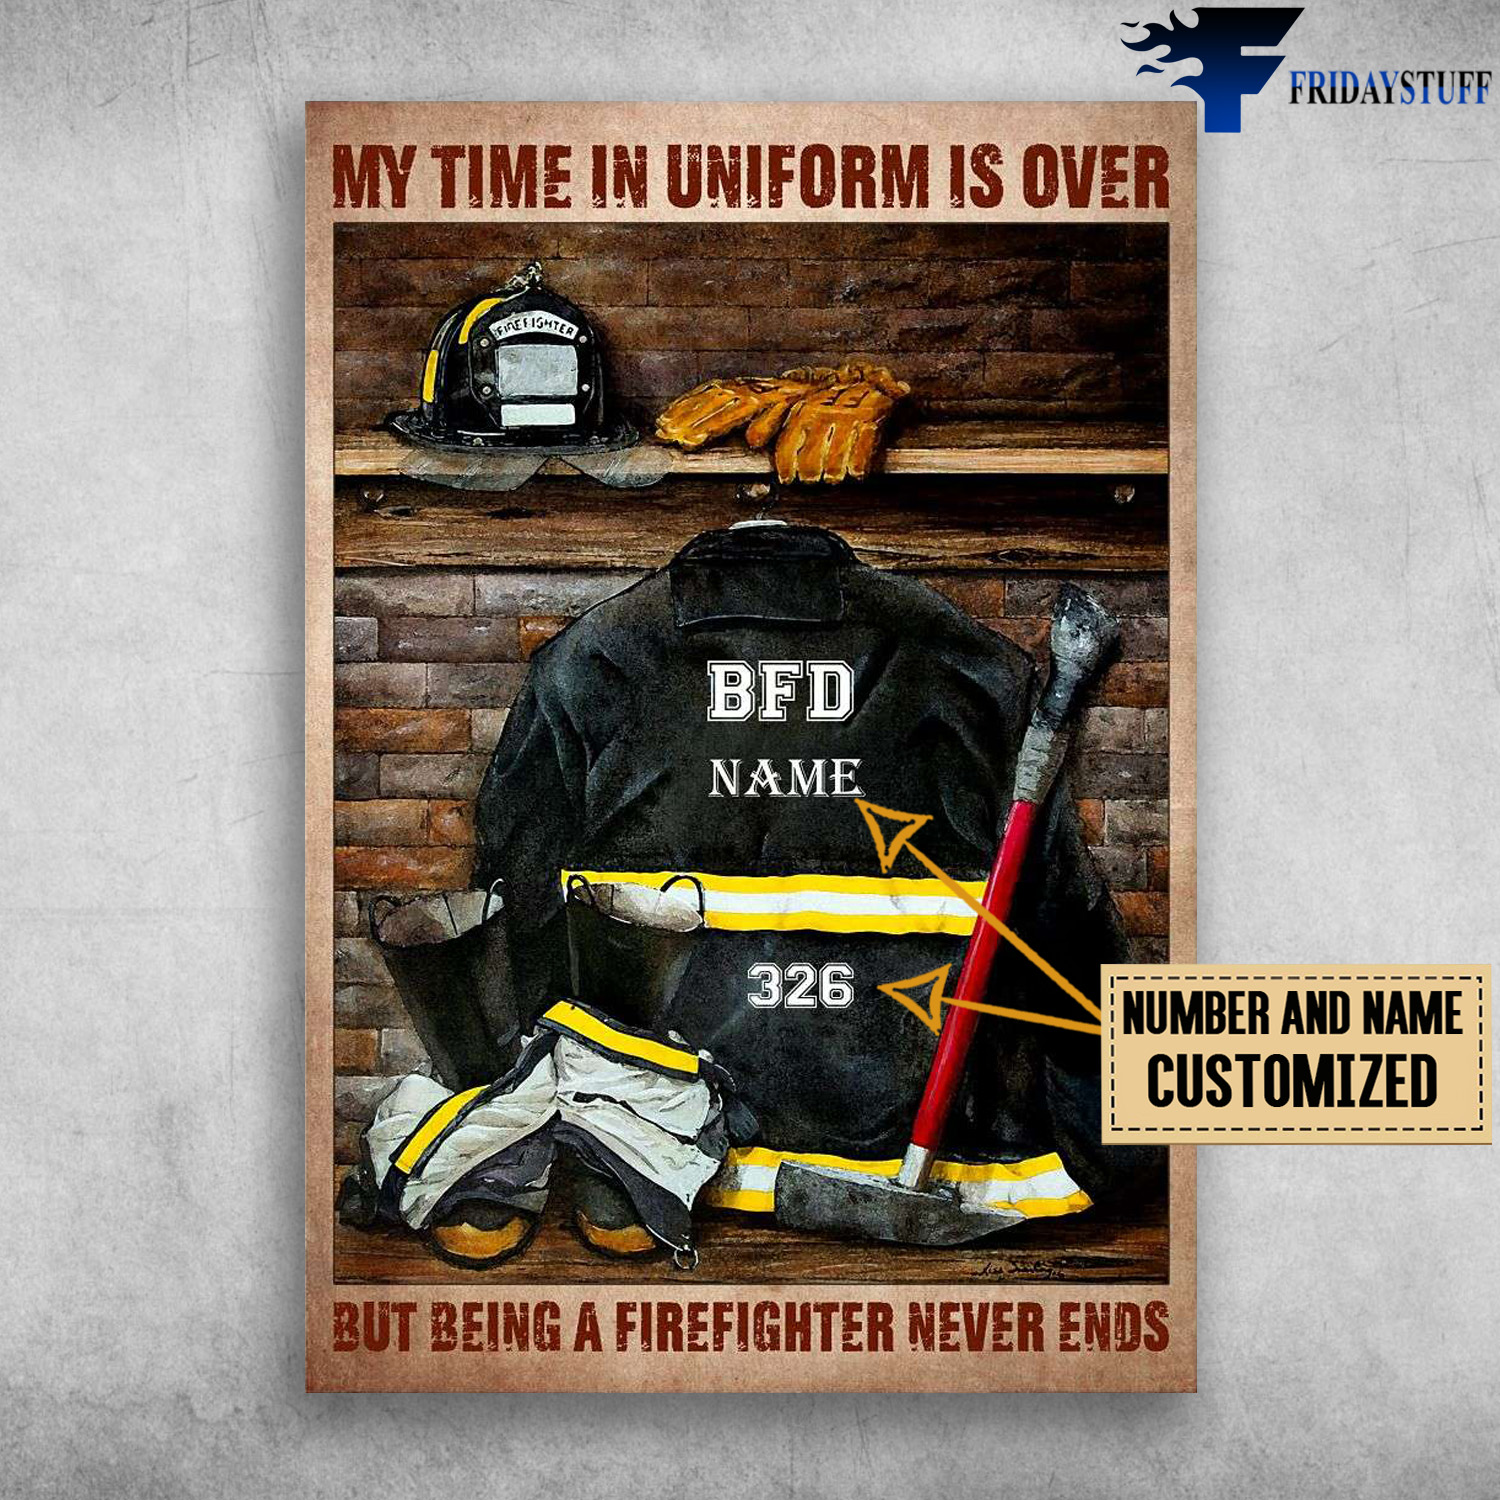 Firefighter Tools, My Time In Uniform Is Over, But Being A Firefighter Never Ends